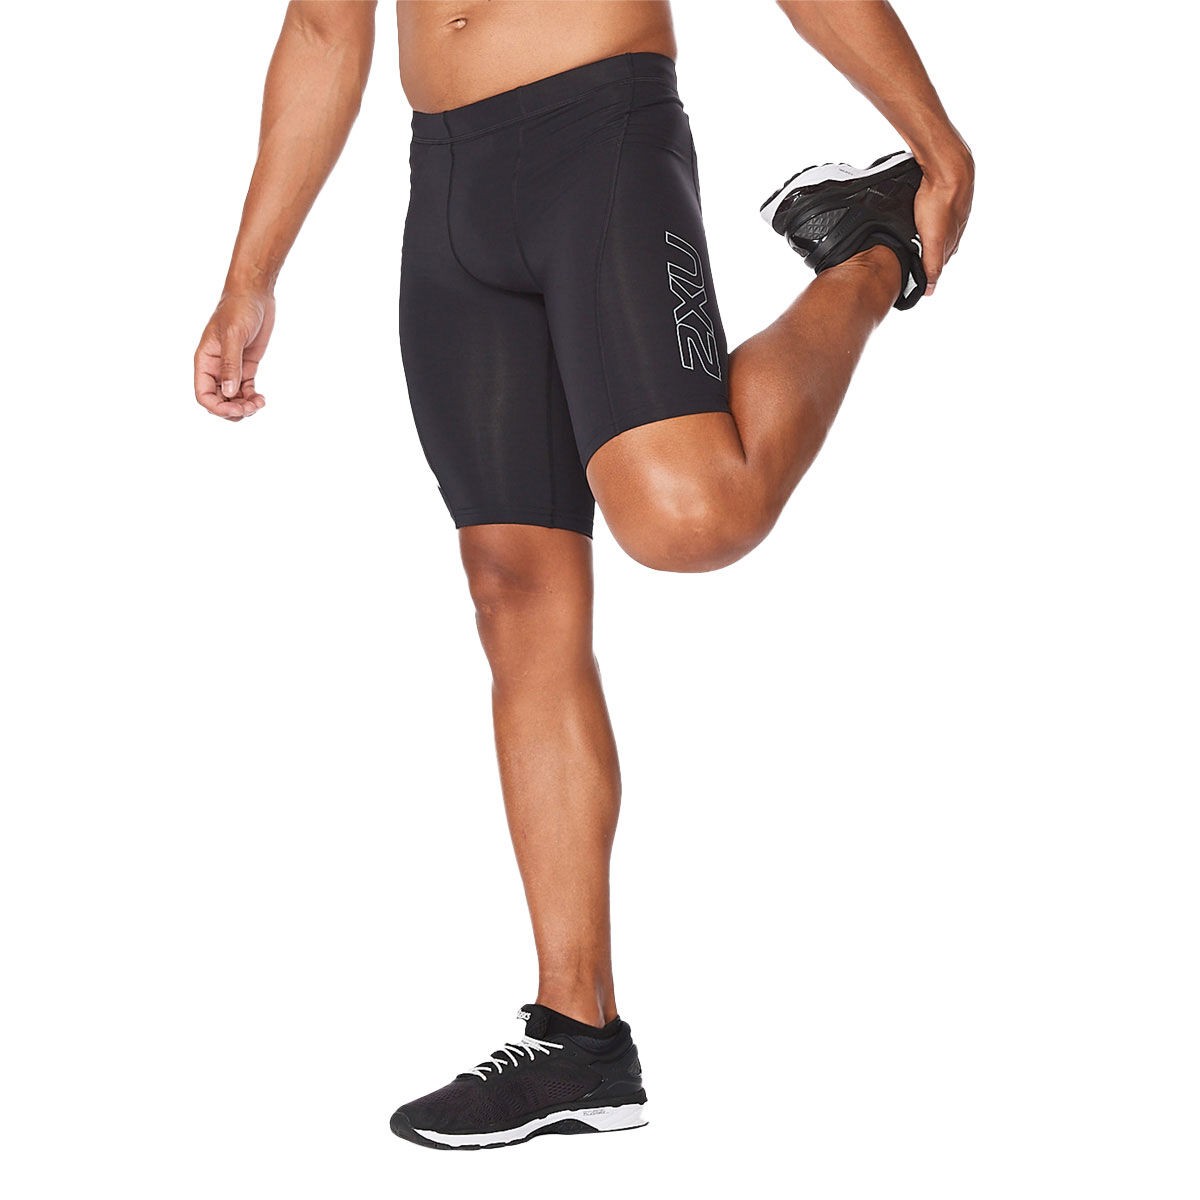 Men's Frequency 8 Compression Short